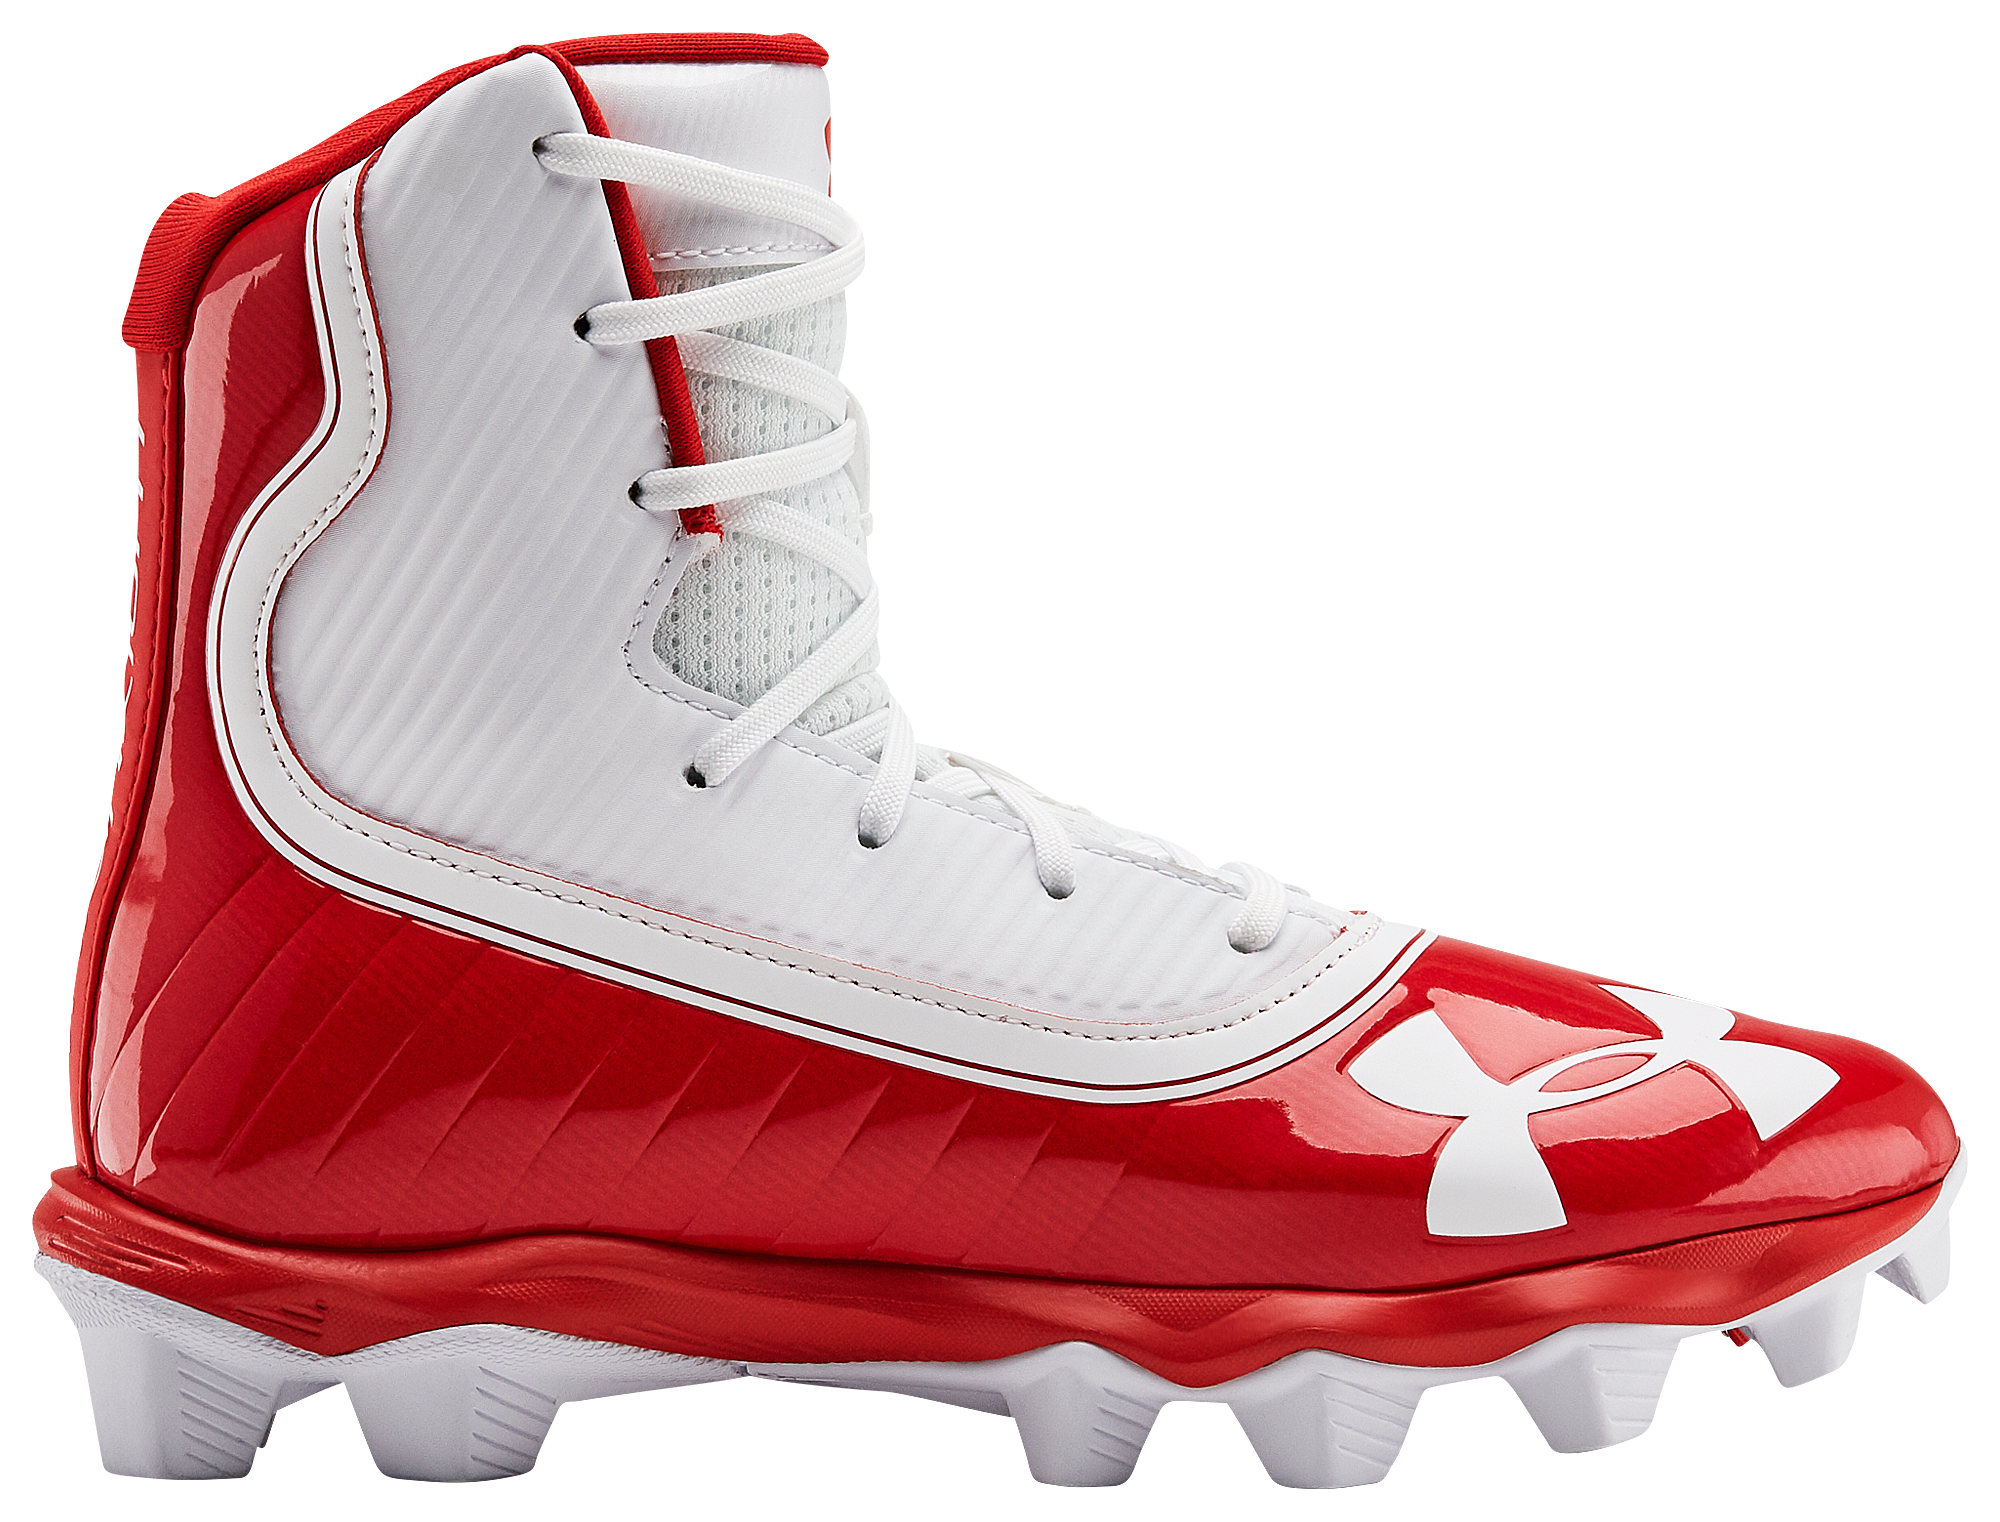 boys red football cleats